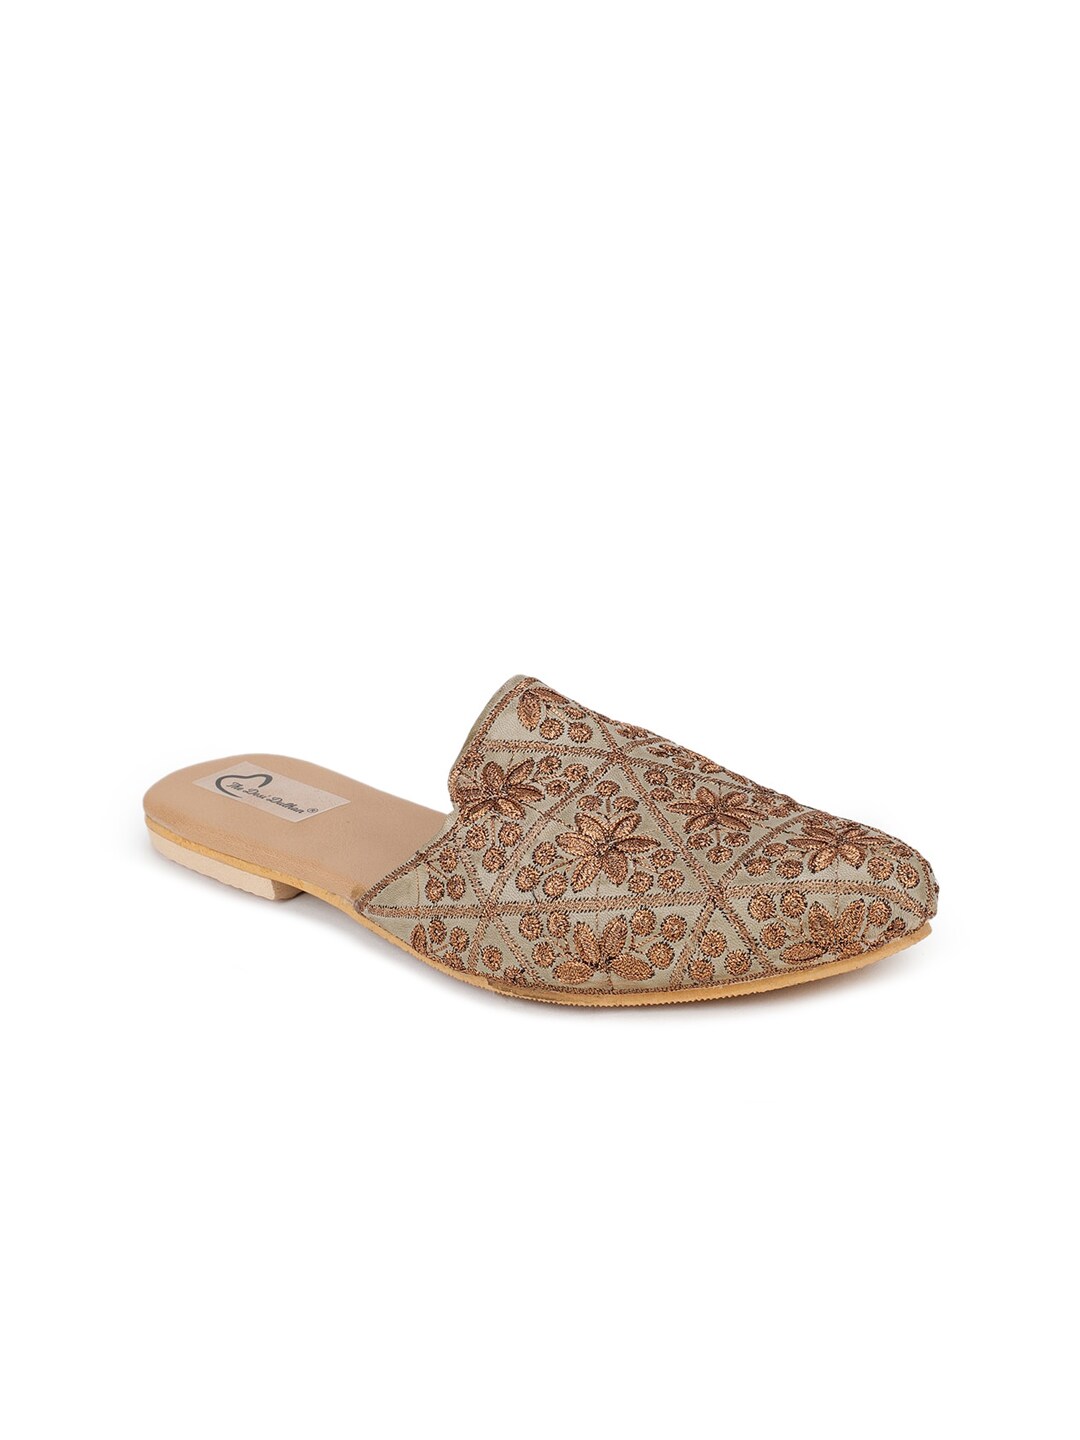 The Desi Dulhan Women Copper-Toned Textured Leather Ethnic Flats Price in India